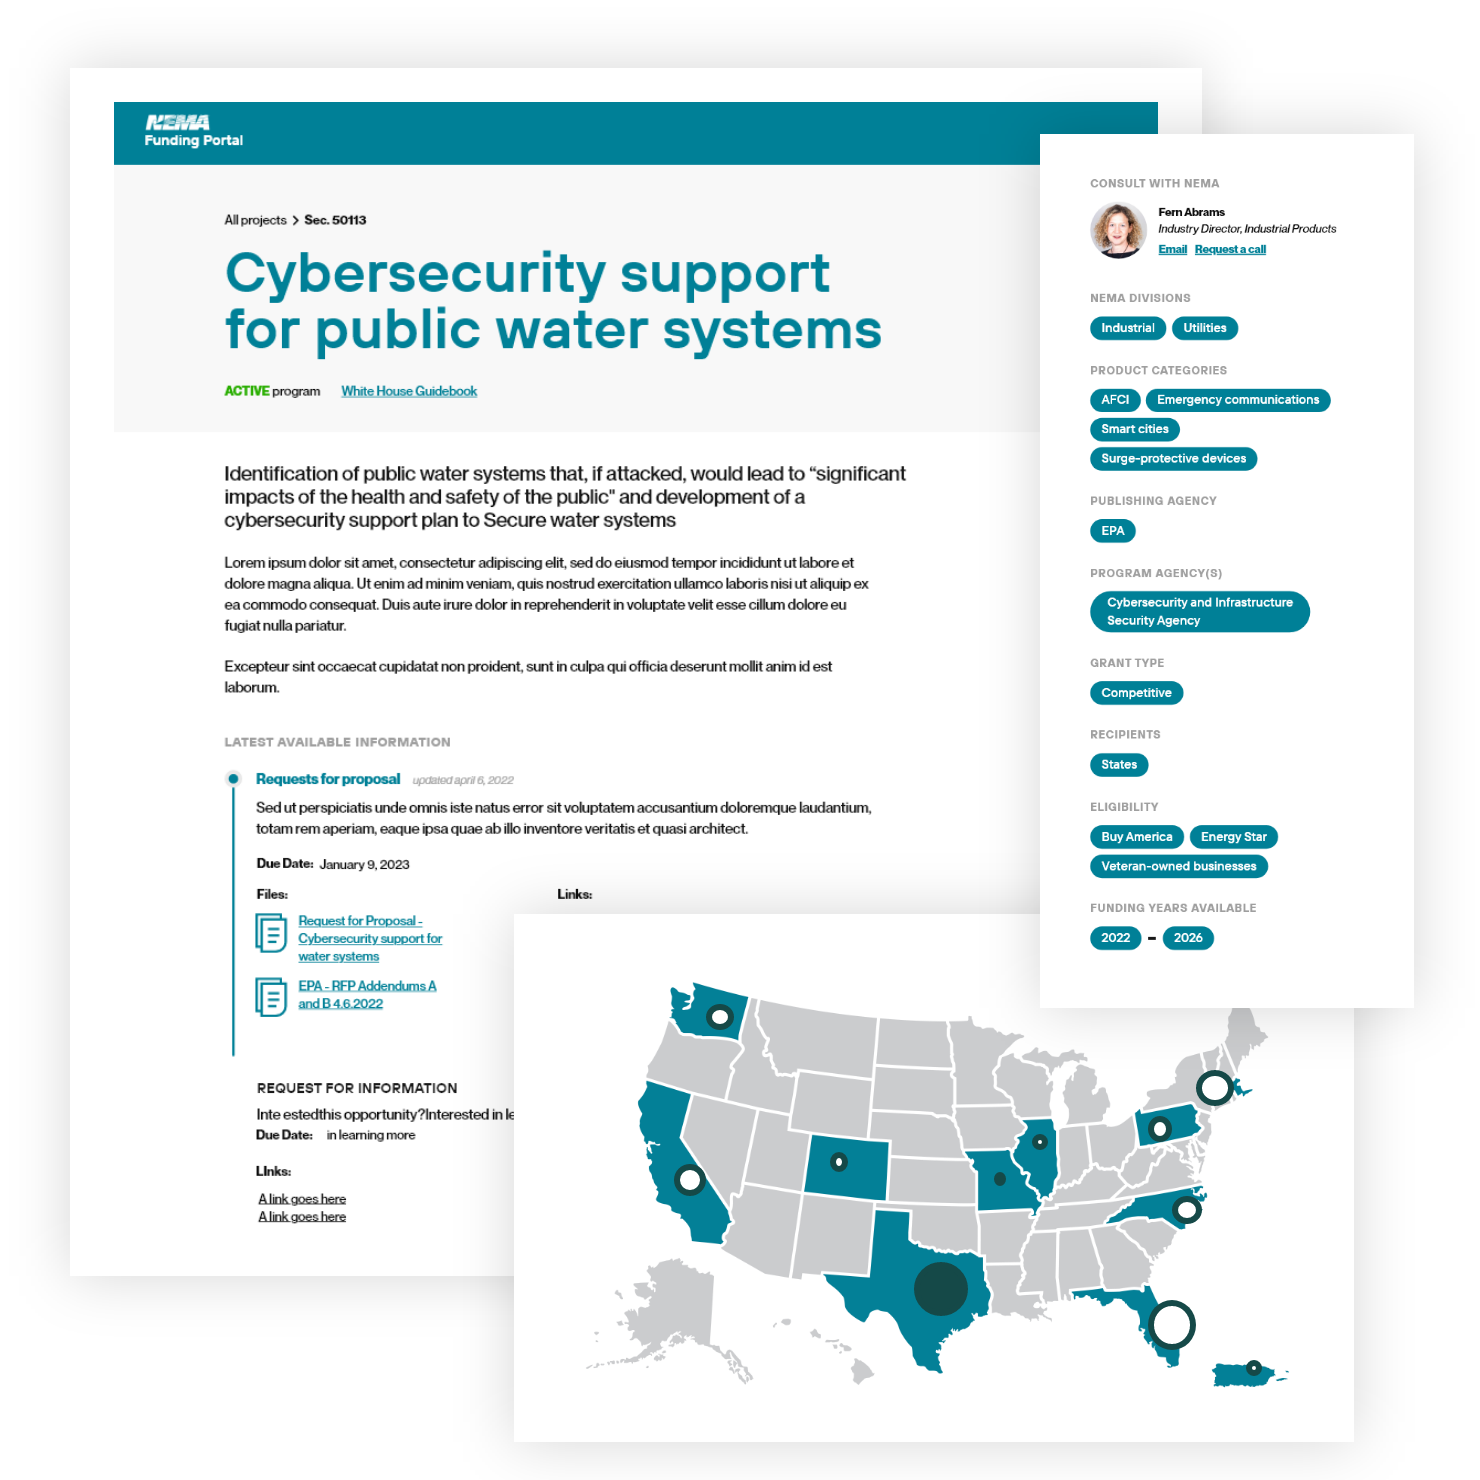 Screenshots: All Projects Sec. 50113 Cybersecurity support for public water systems, Active Program, White House Guidebook, body text, interactive map, topics and other taxonomy terms in sidebar.